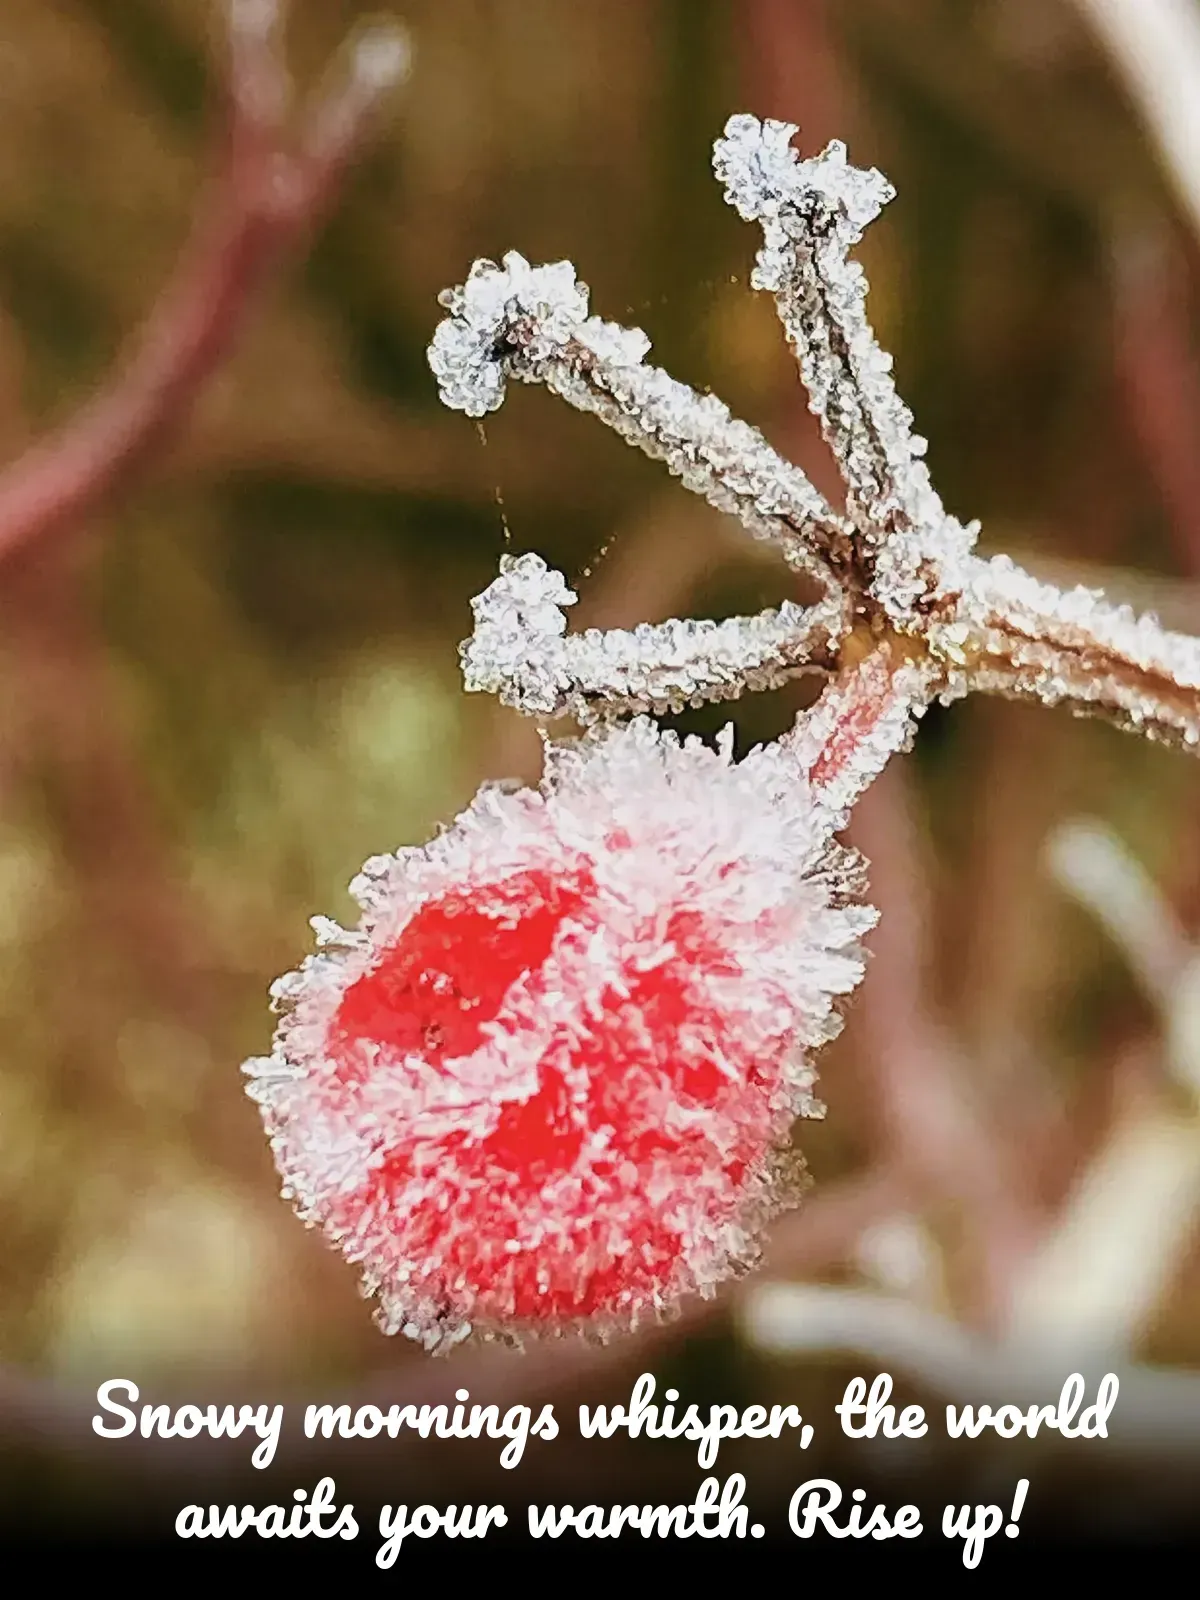 A frost-covered red berry on a snowy branch